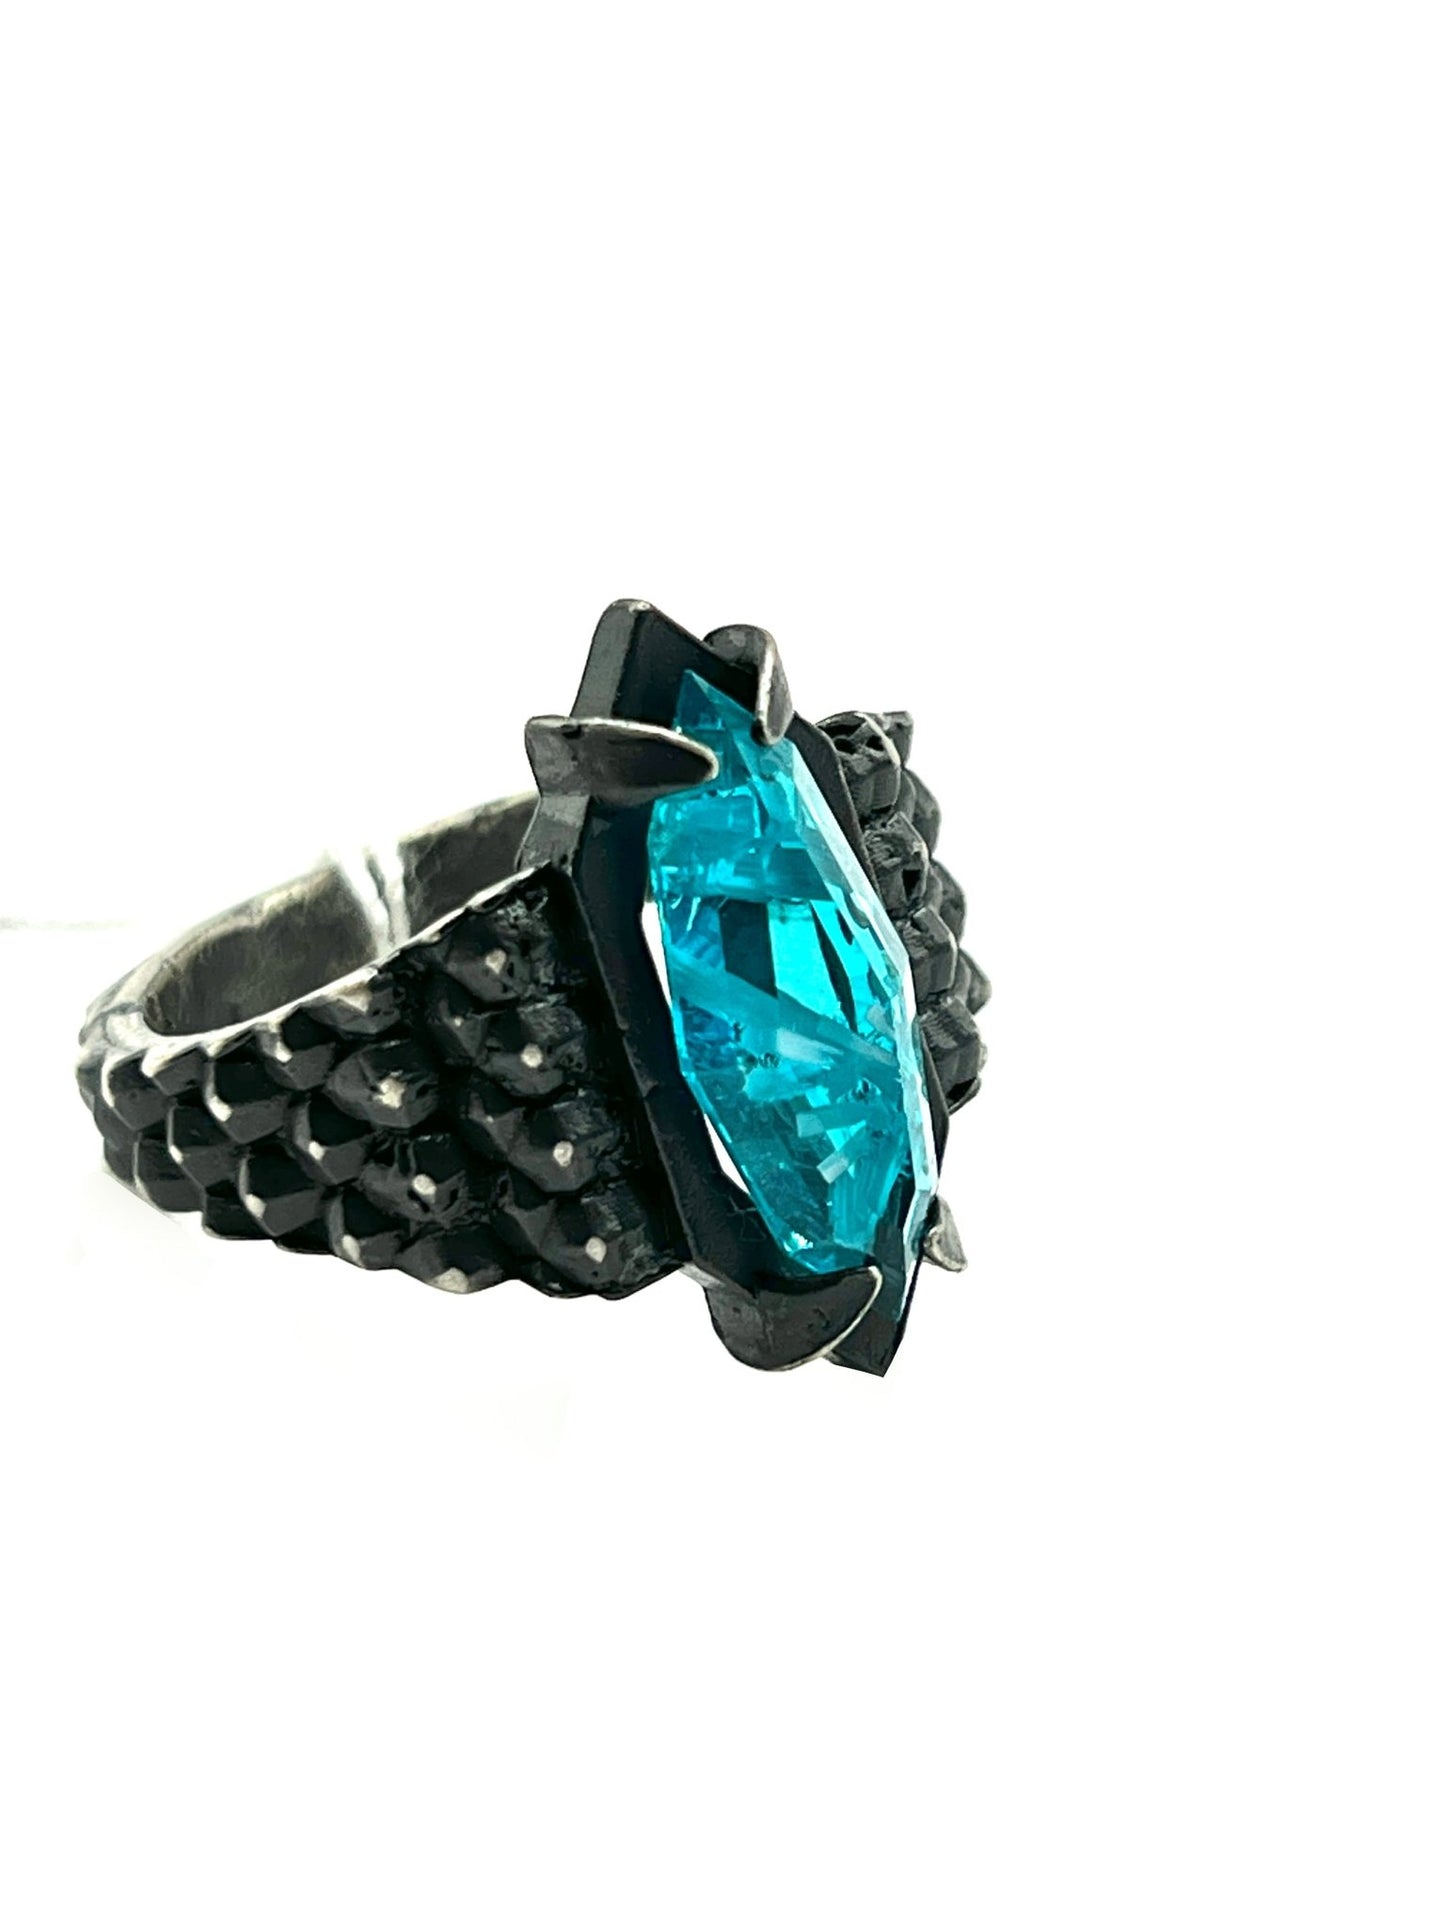 Blue stone (Bridewell) Sterling Silver Ring by Julian the 2nd (size 11) - Nocturne LLC